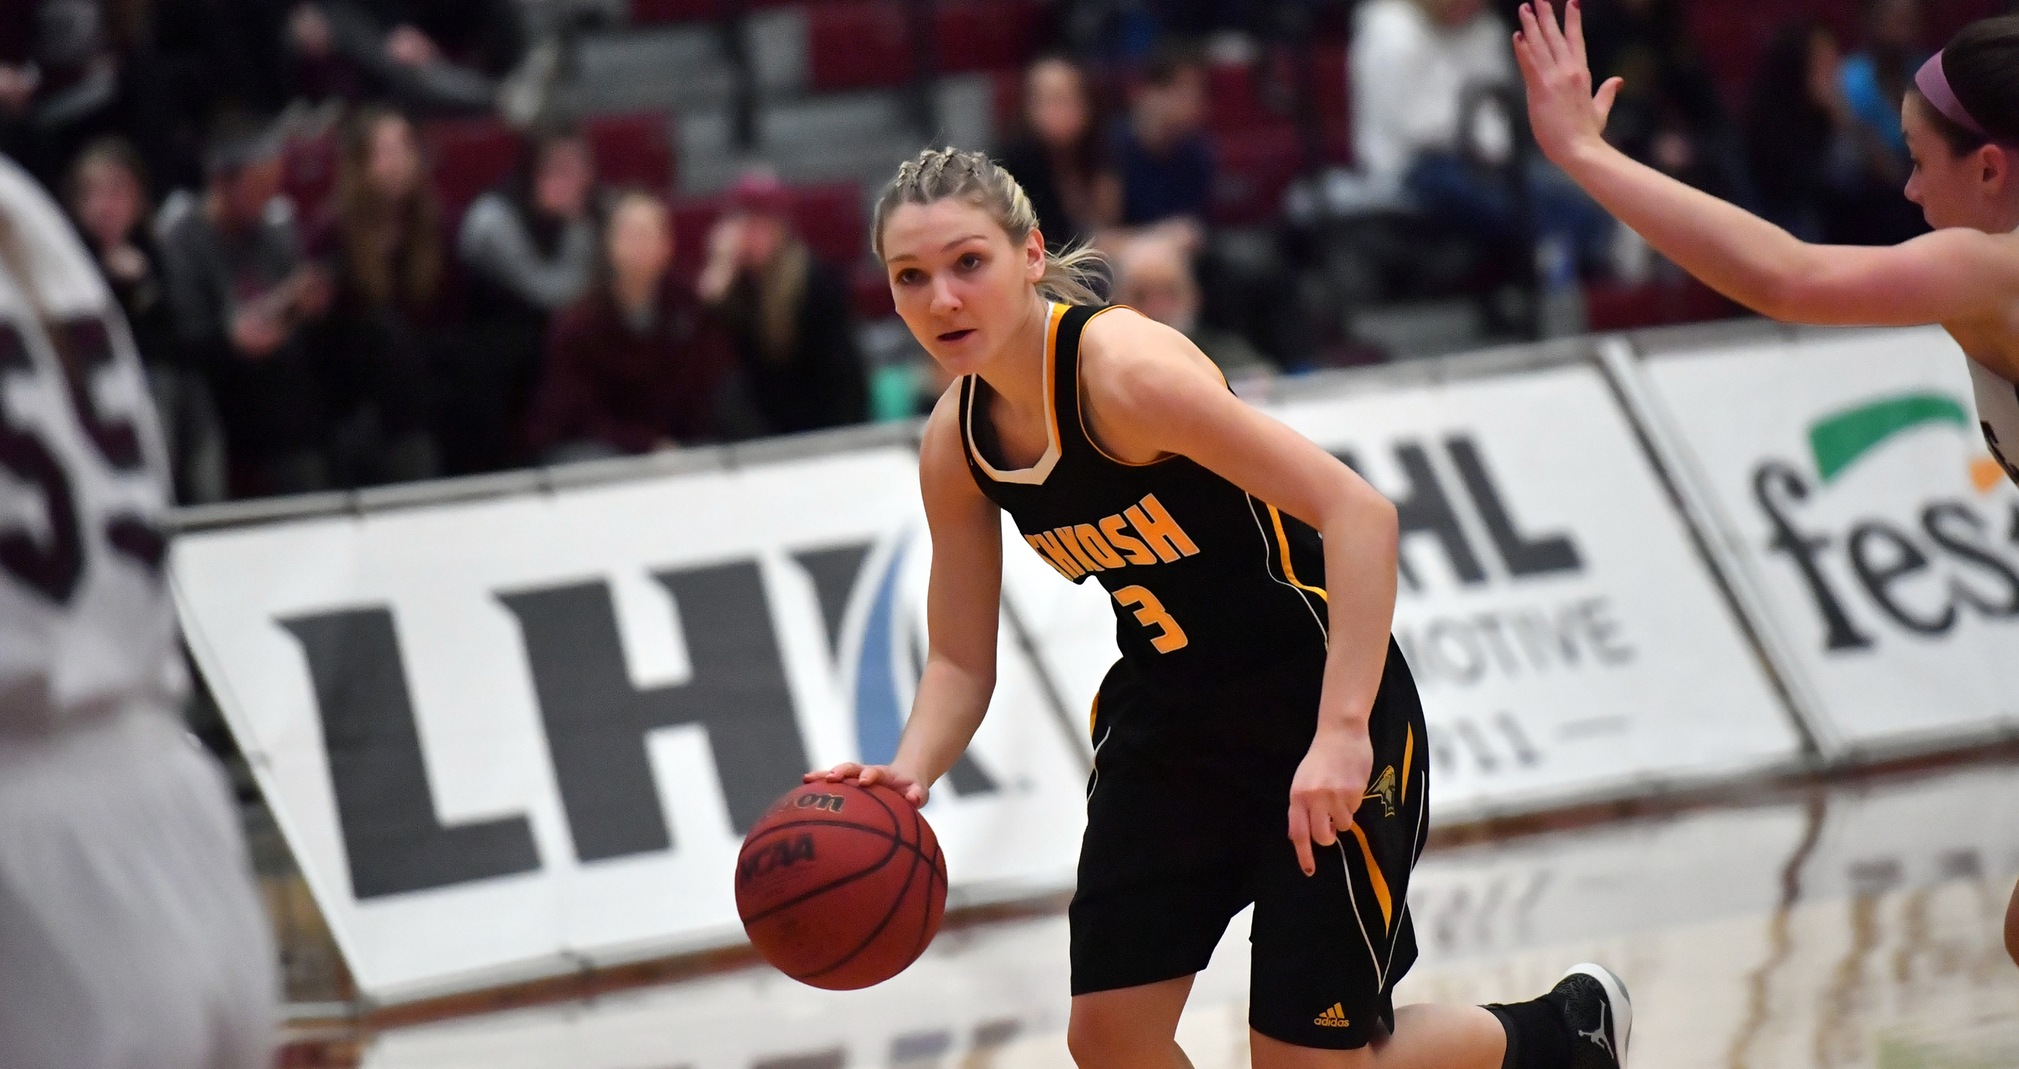 Jaimee Pitt scored nine of her 11 points during the first two quarters to help UW-Oshkosh take a 37-29 lead over UW-La Crosse to intermission.